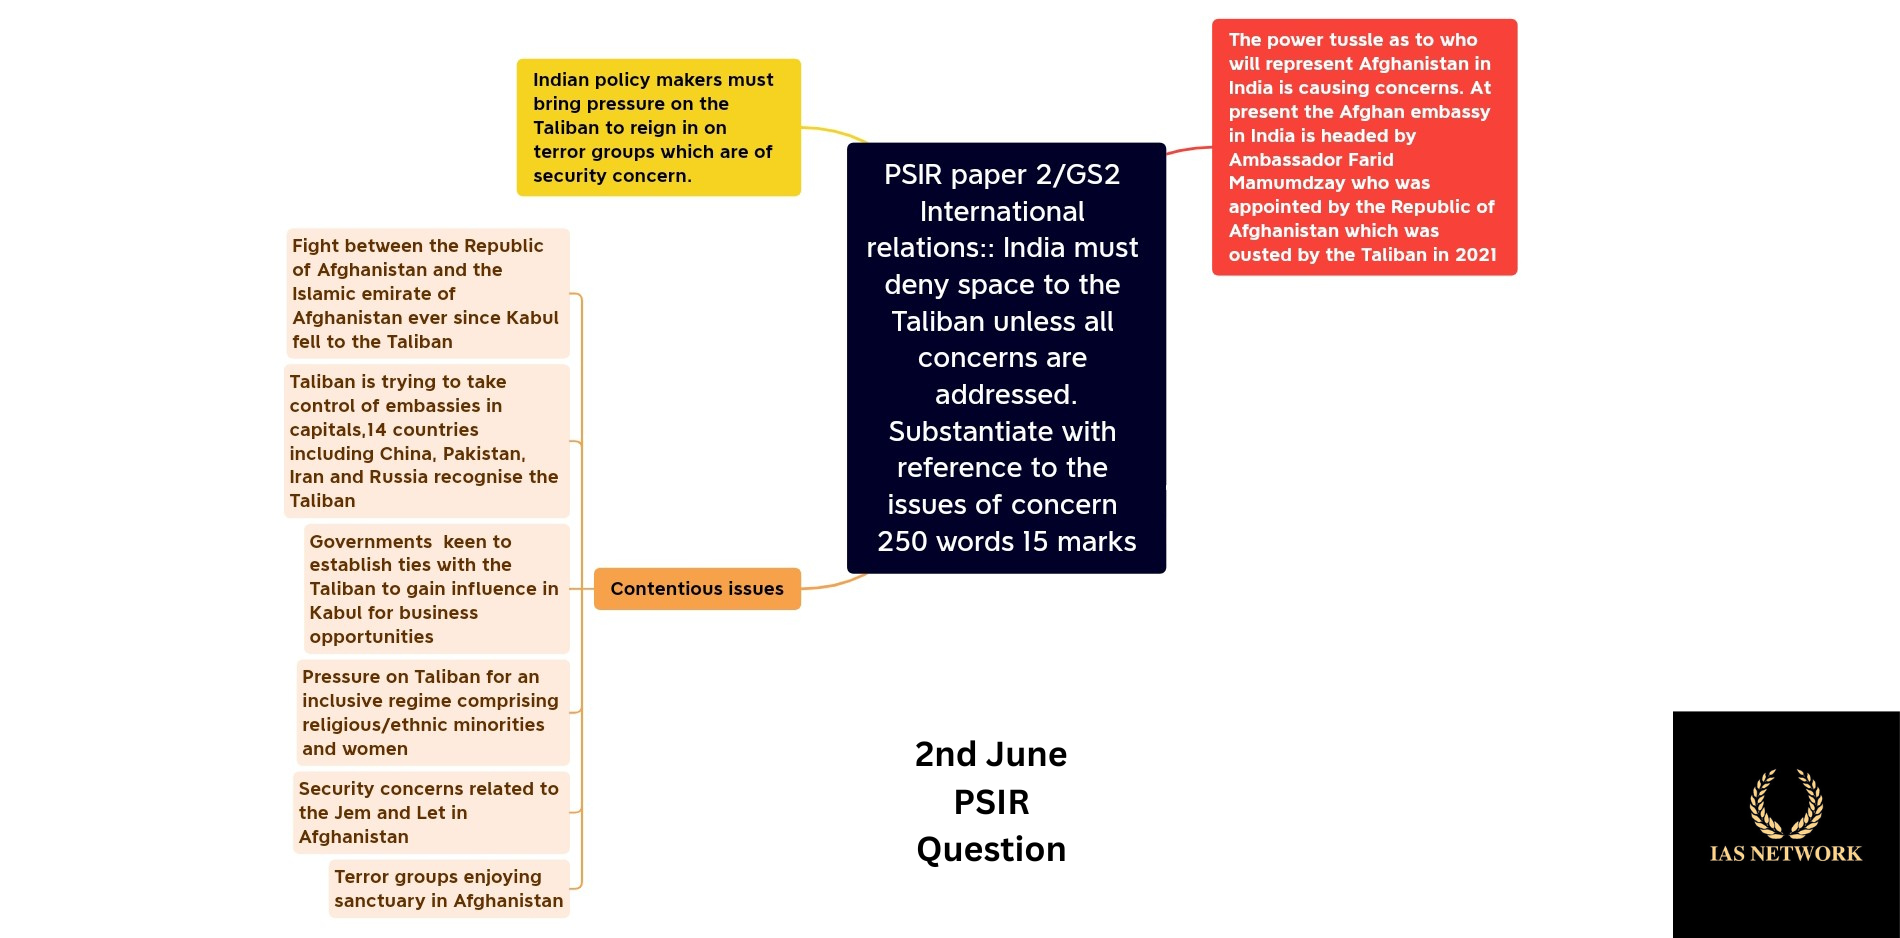 IAS NETWORK 2nd JUNE PSIR QUESTION